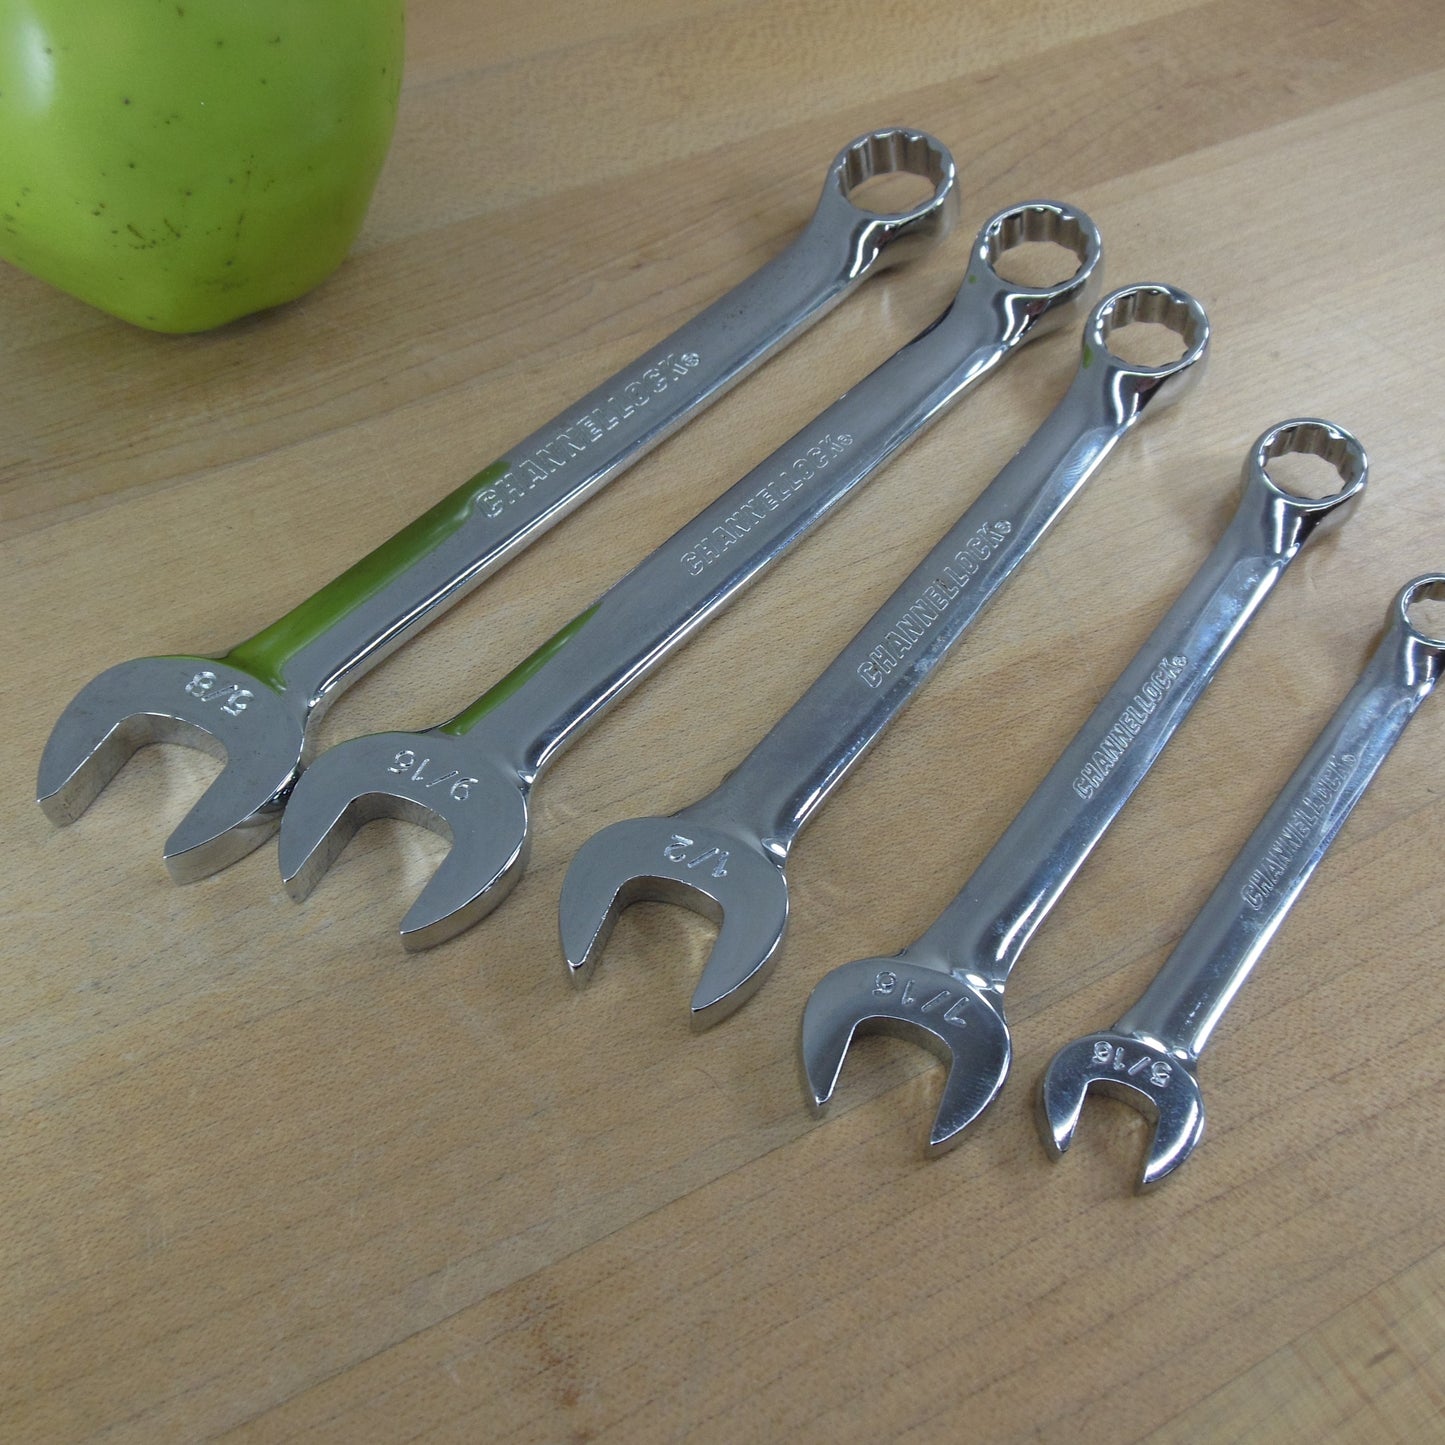 Channellock 5 Piece SAE Combination Wrench Set Used